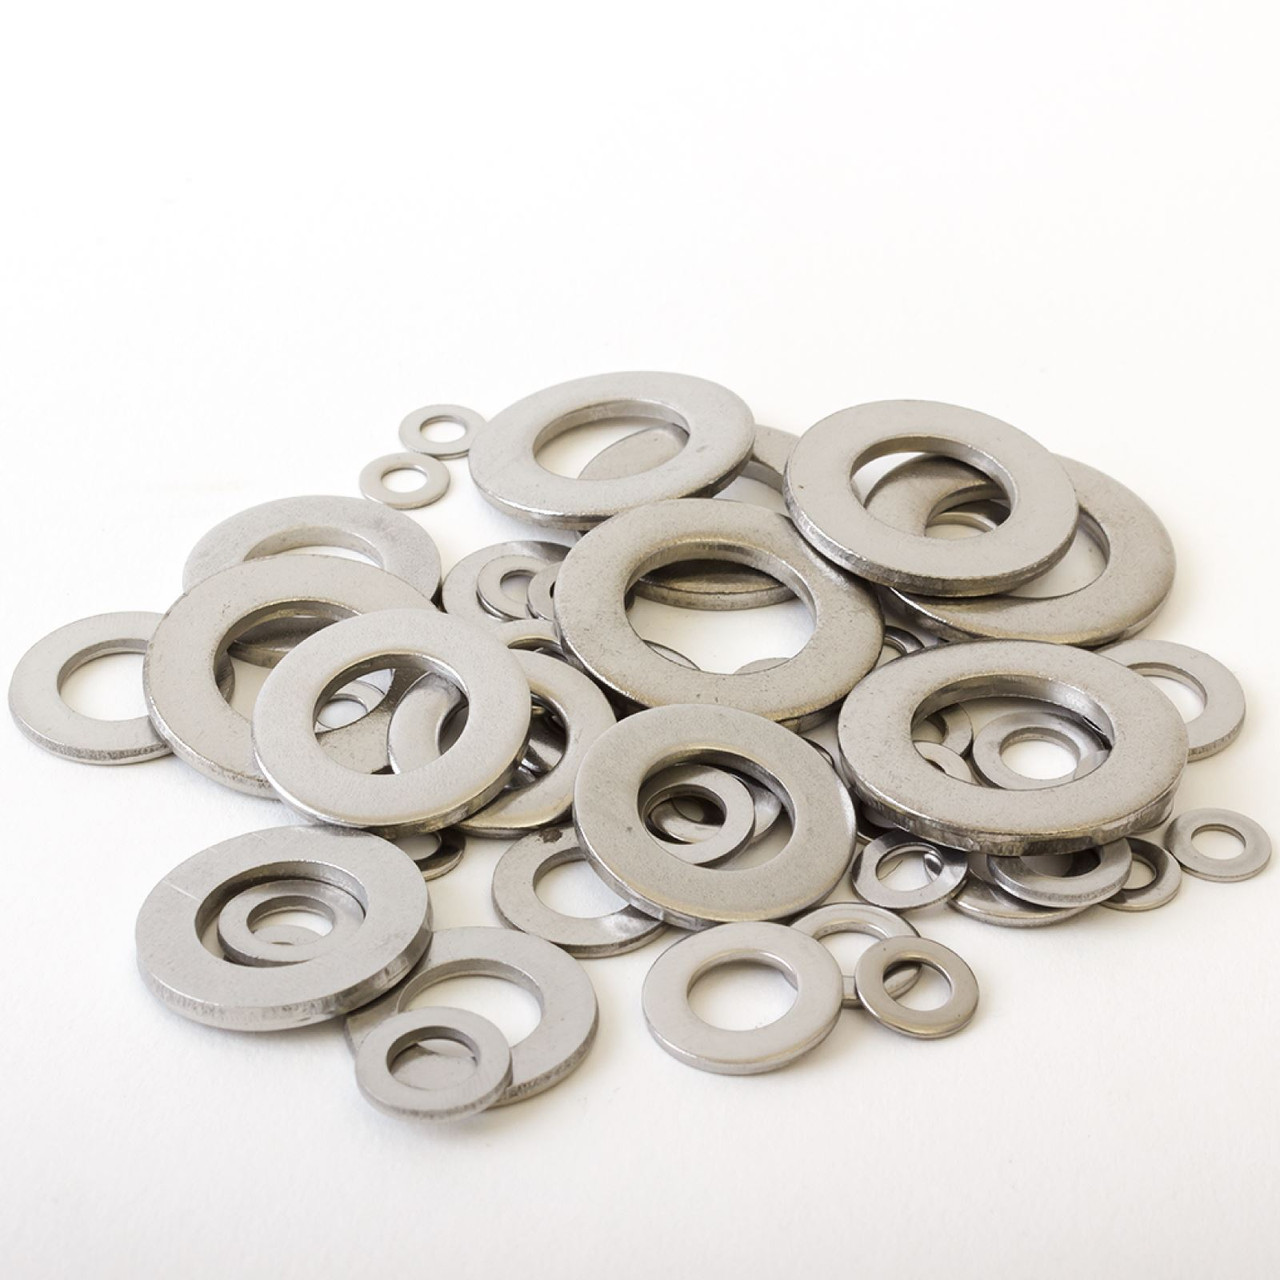 M5 M8 M10 & M12 Stainless Steel Flat Washers M6 Form A: M3 M4